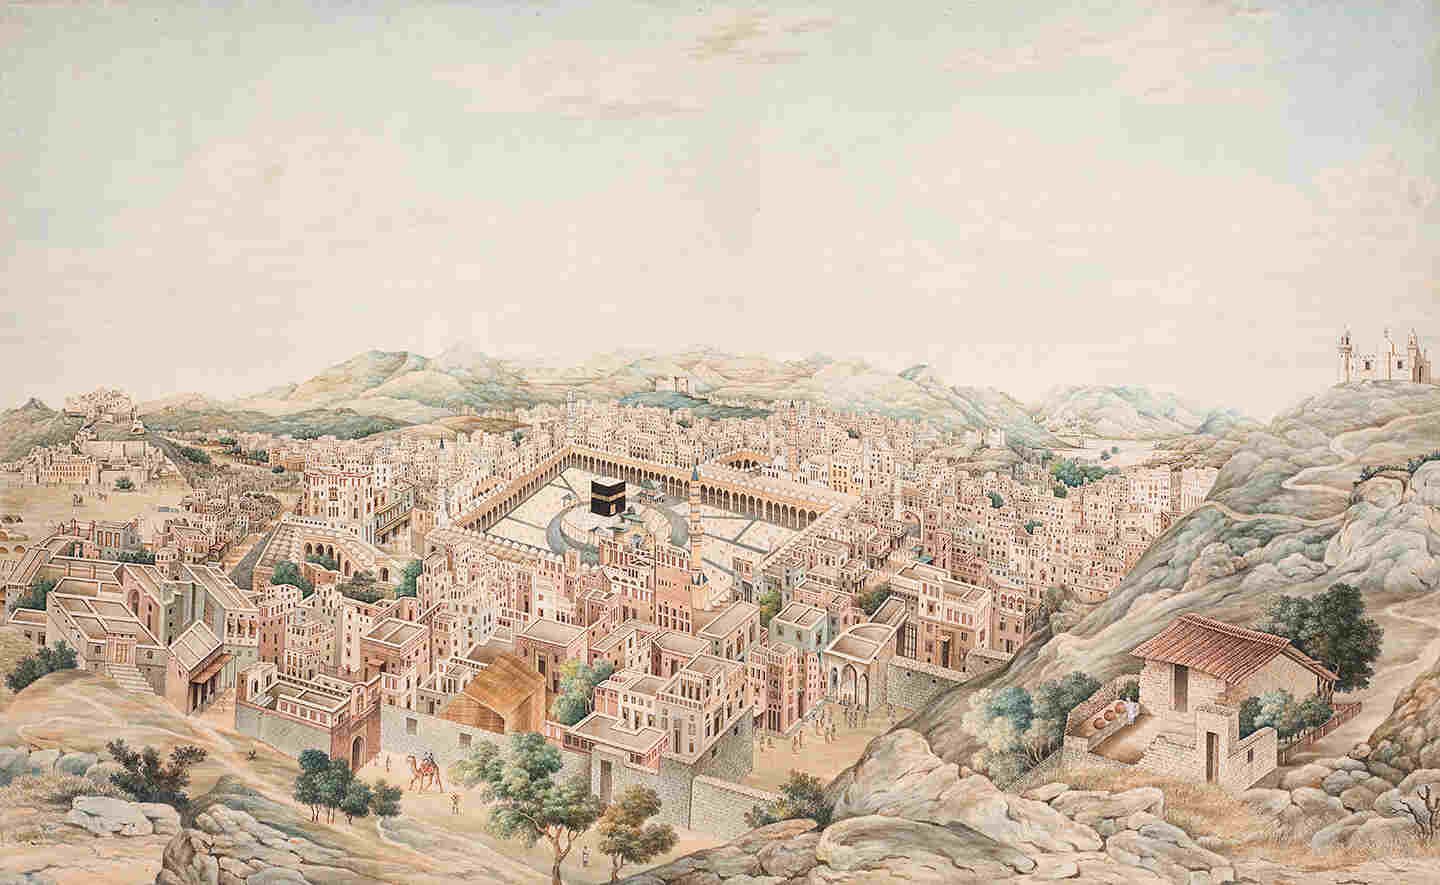 An illustration of the city of Makkah (Mecca)